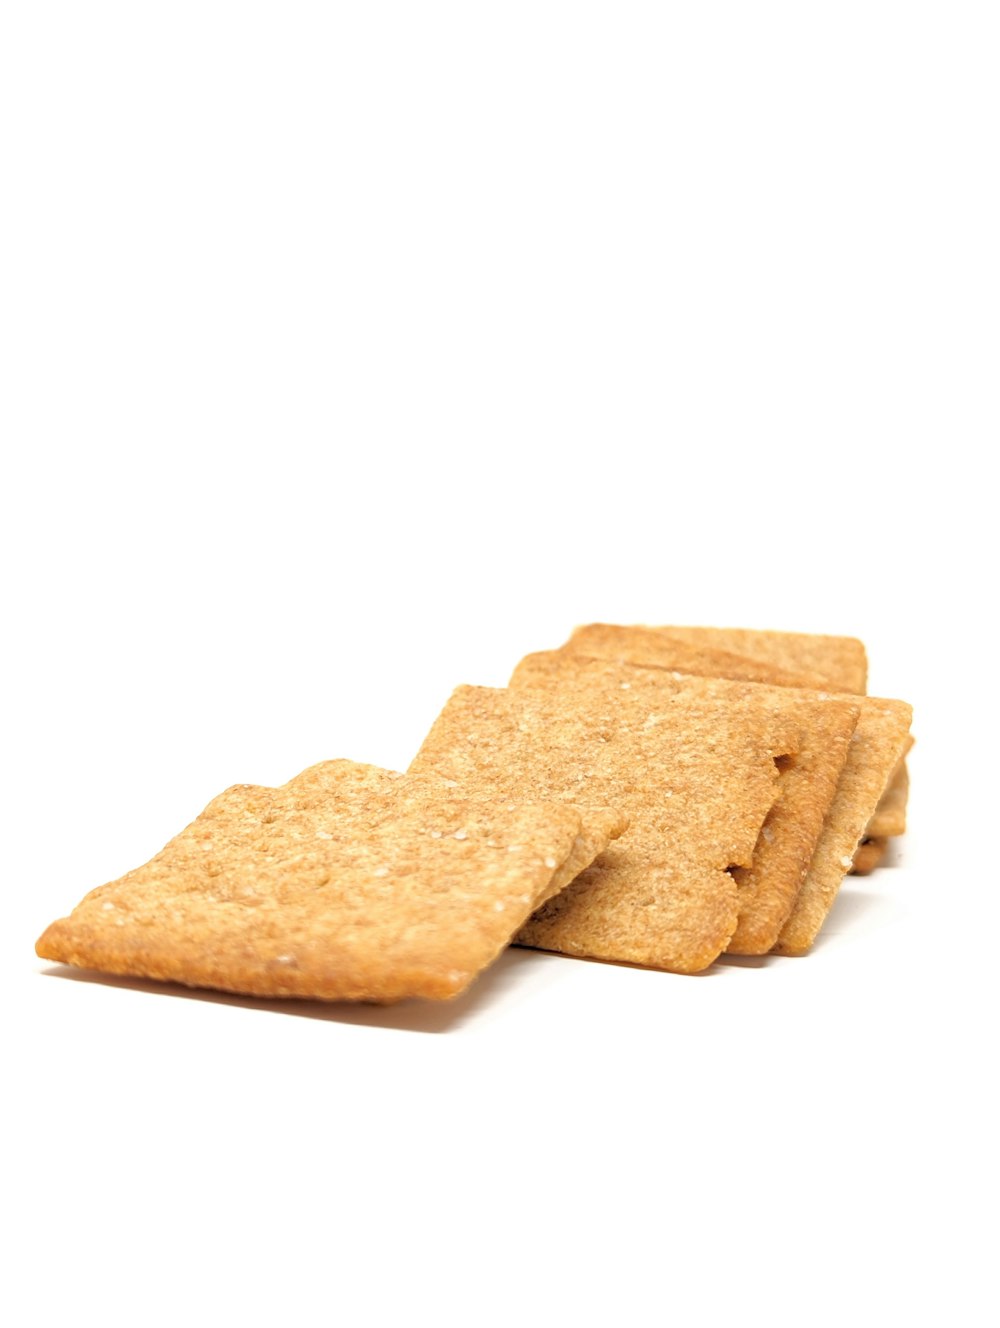 a stack of crackers sitting on top of each other